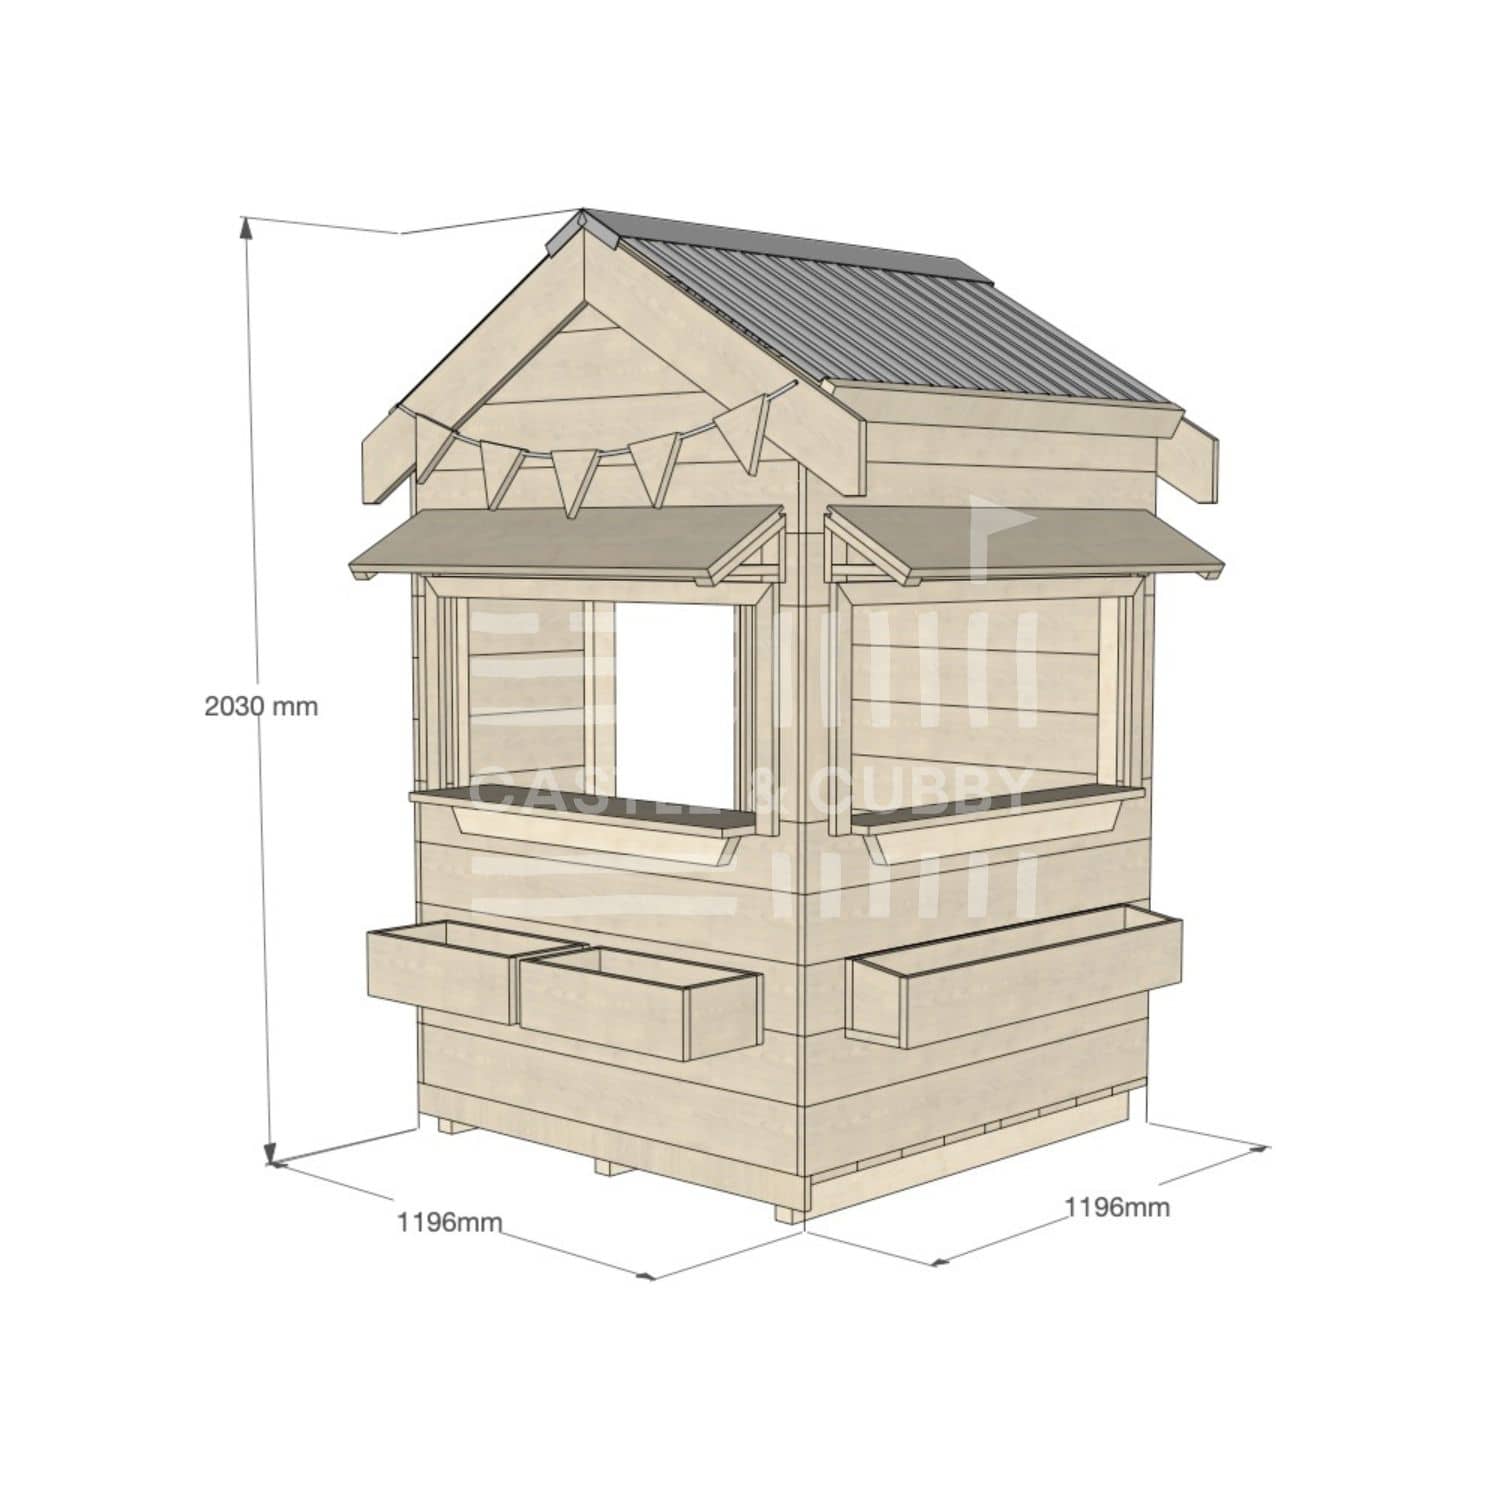 Pitched roof raw wooden cubby house commercial education little square dimensions